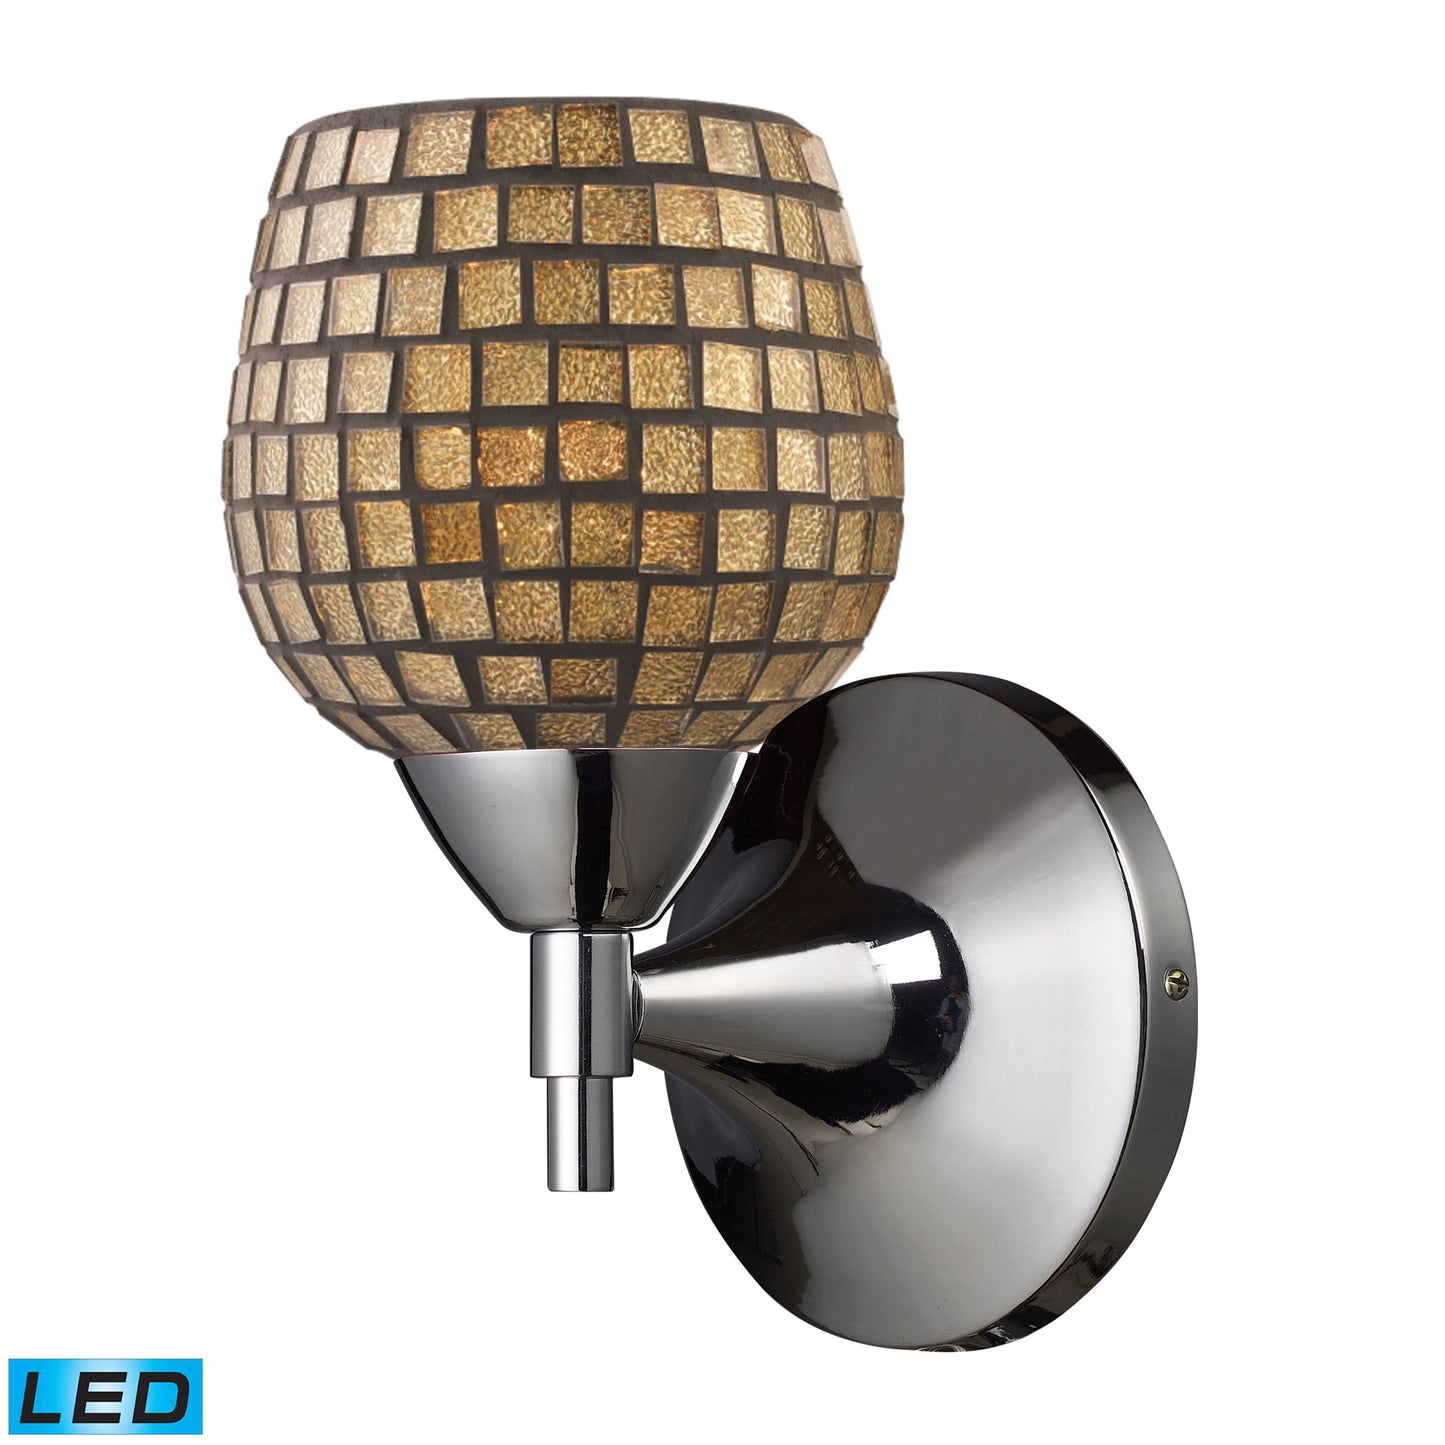 Celina 1-Light Wall Lamp in Polished Chrome with Gold Mosaic Glass - Includes LED Bulb